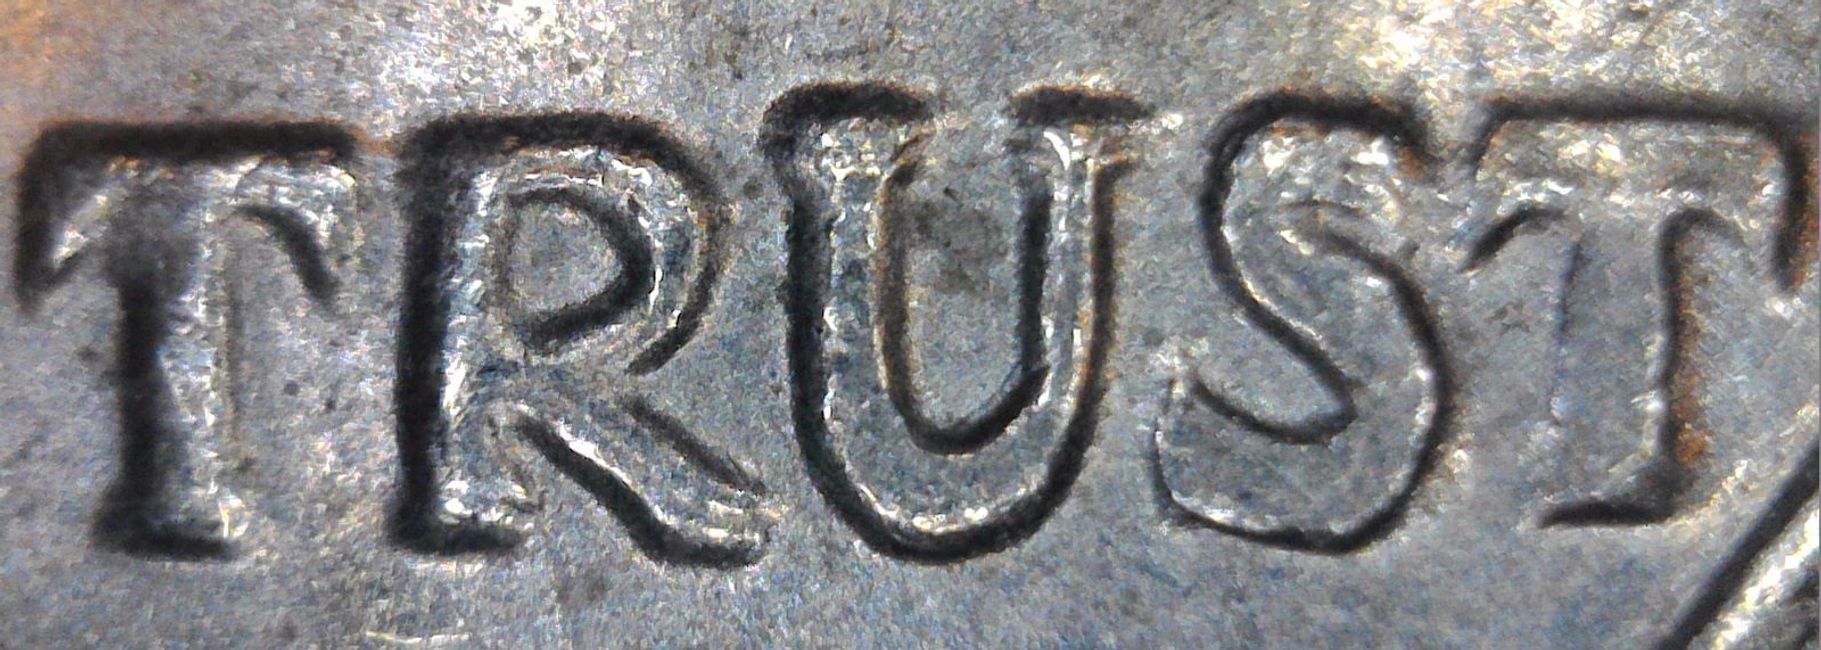 1971D Kennedy Half Dollar DDO-015, the letters in TRUST are doubled in the more valuable form of dou